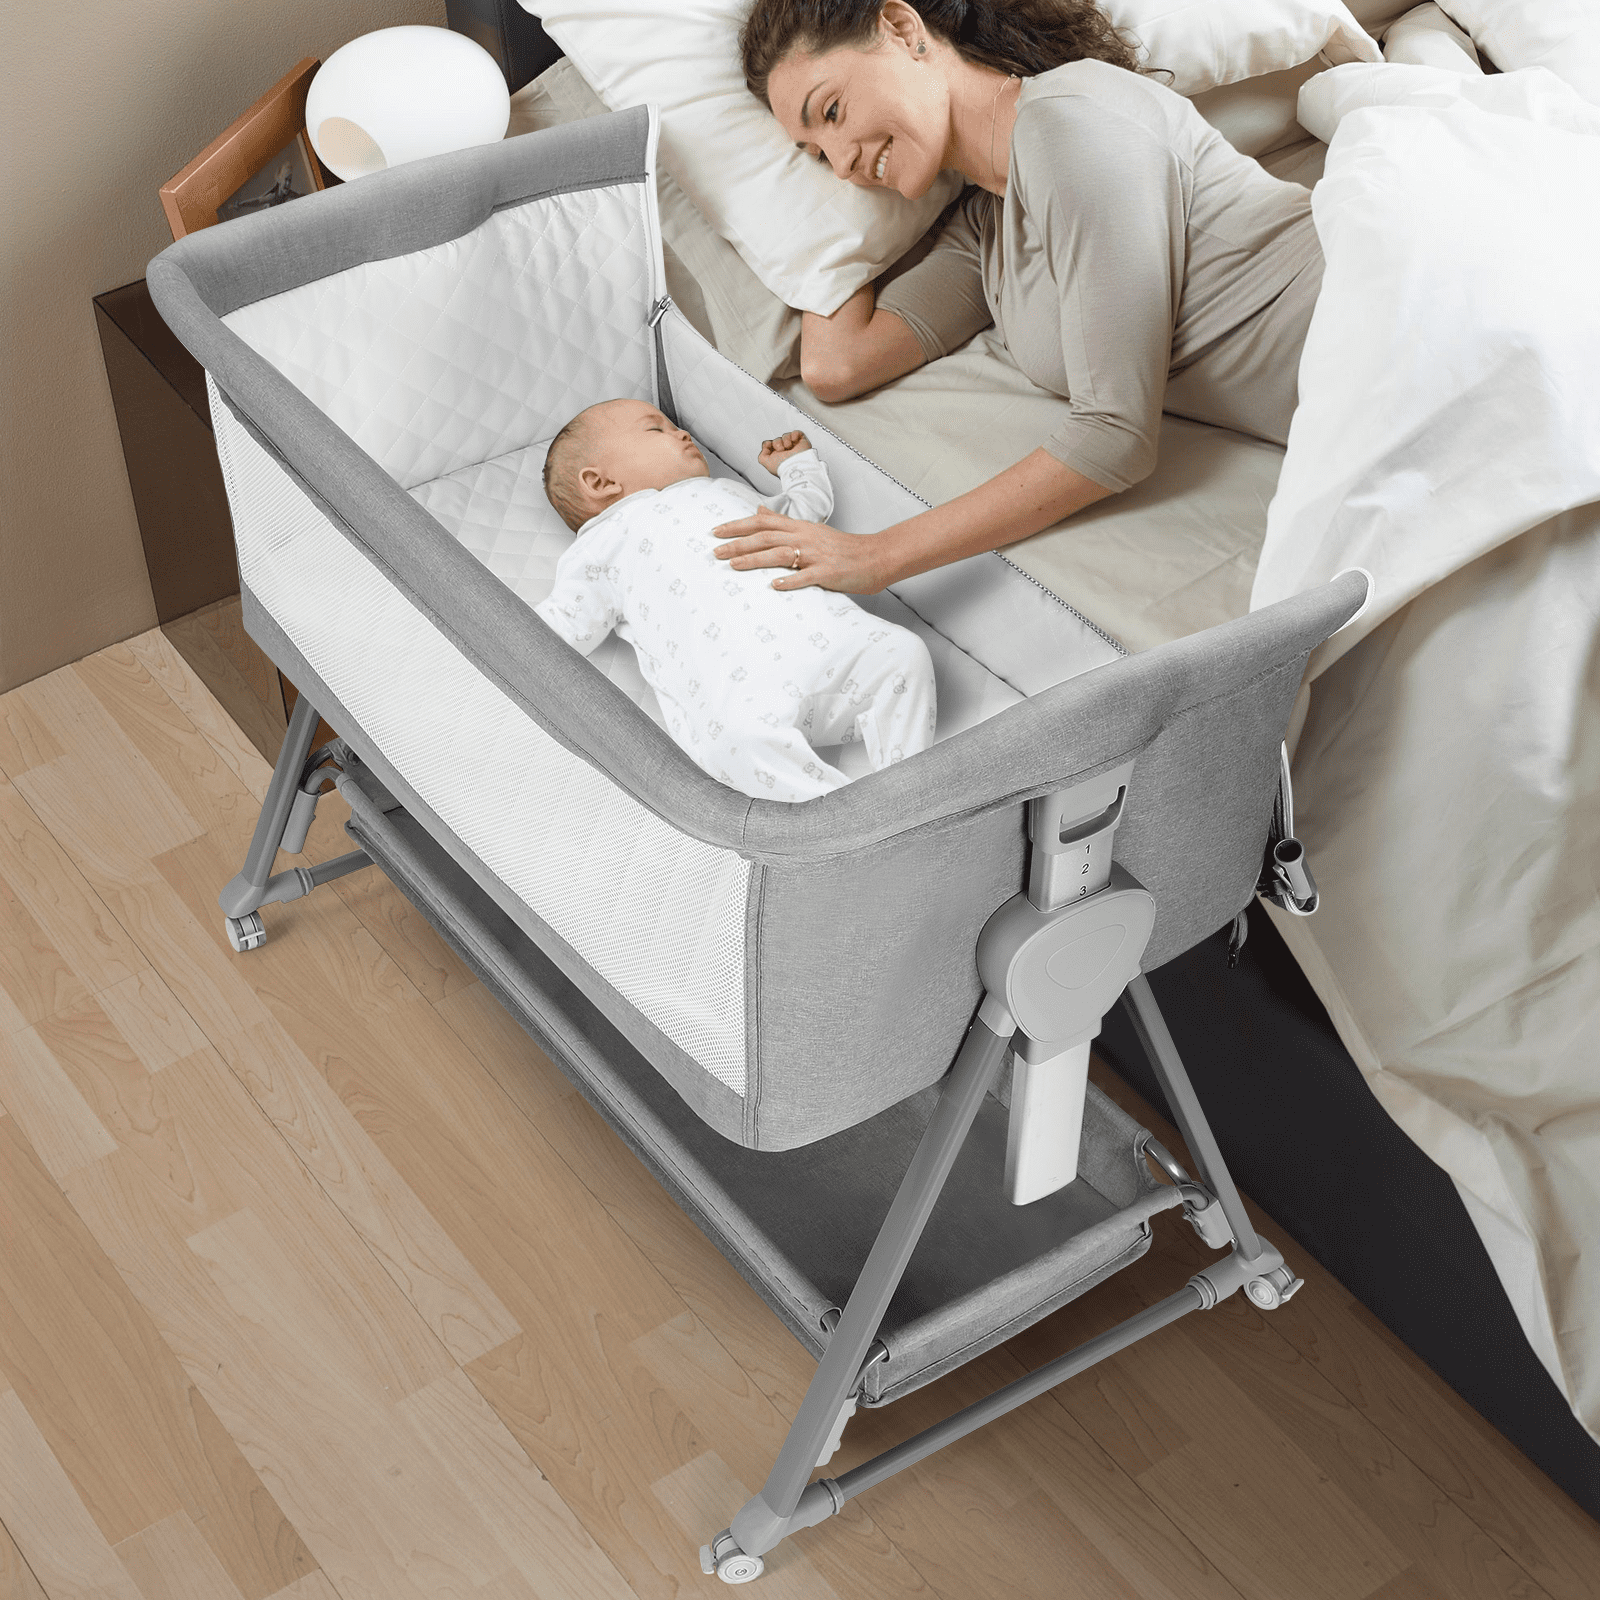 Cowiewie Bassinet for Babies Large Volume and Mobile with Storage Basket Bedside Sleepers for 0-6 Months Baby Infants